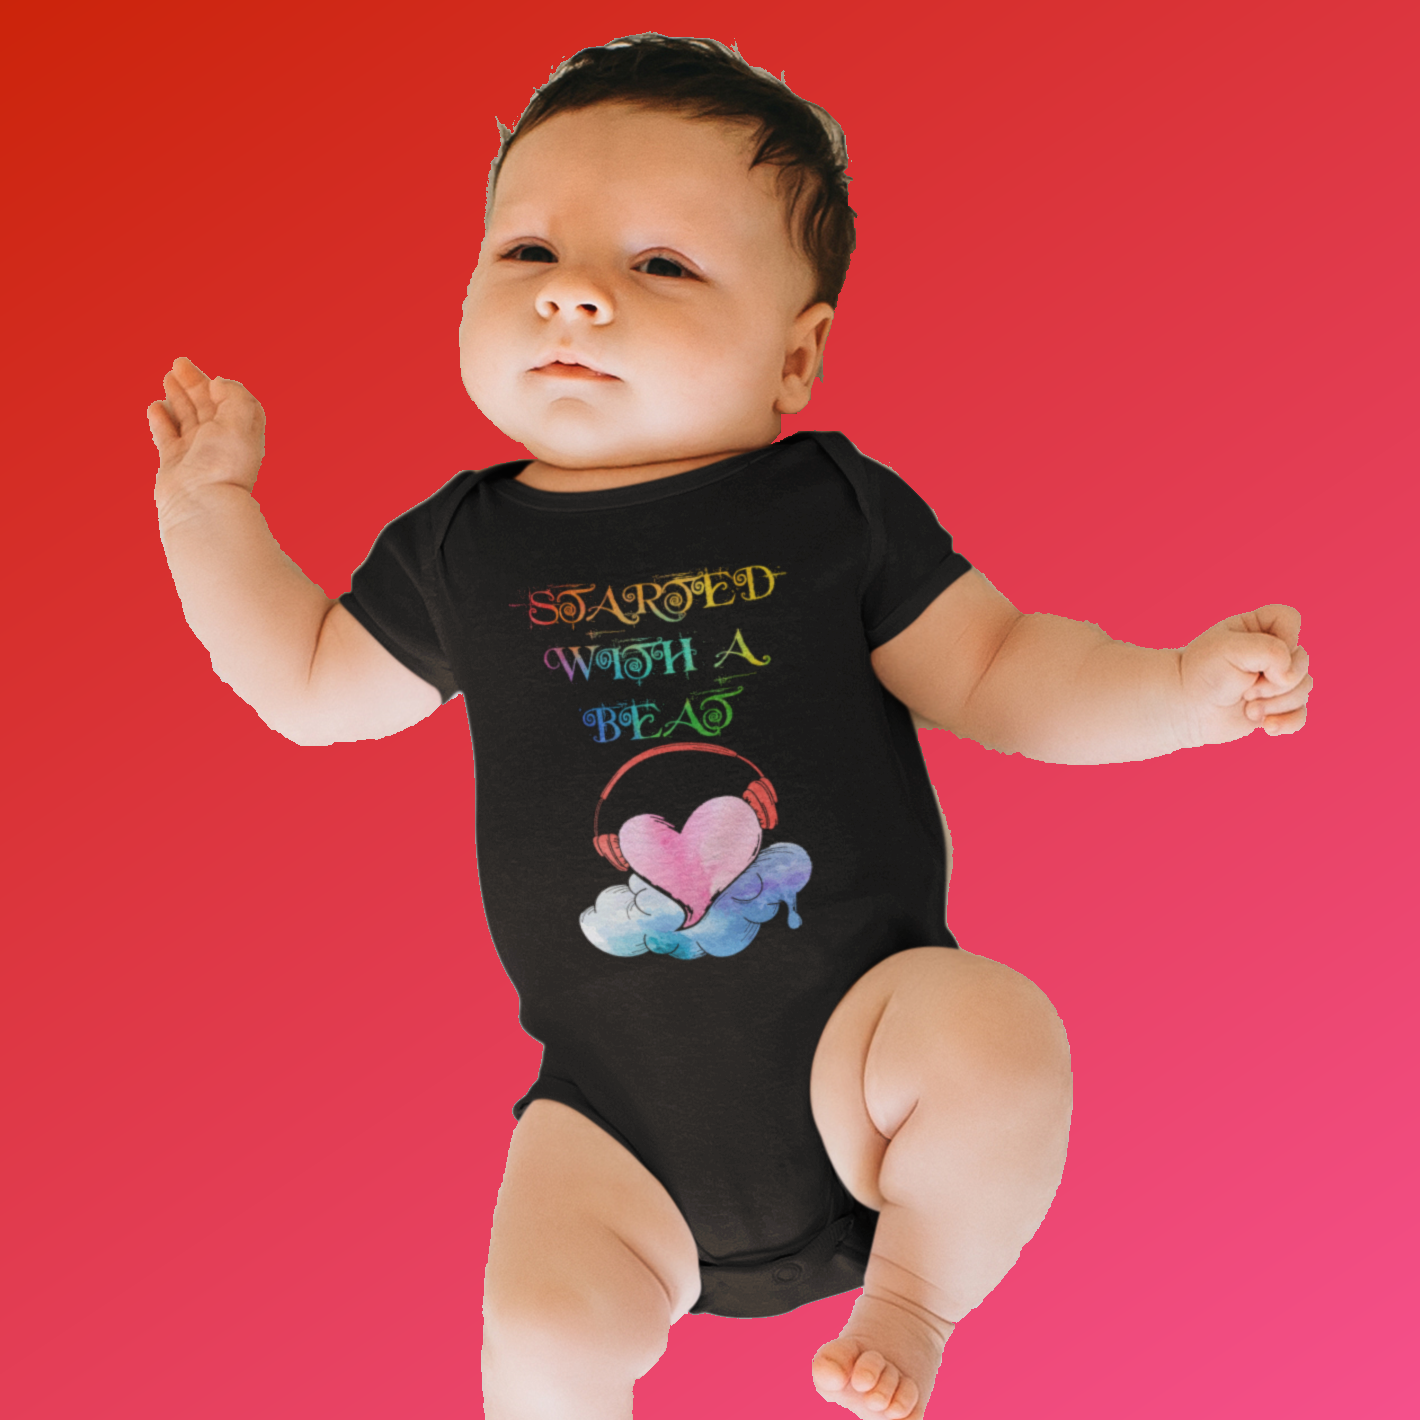 Enjoy your little beat-maker in the BEAT BABY ONESIES! Featuring a rave-inspired design and music beat print, your baby will be standing out from the crowd in style. Made of soft cotton, it's perfect for playing and rocking out.